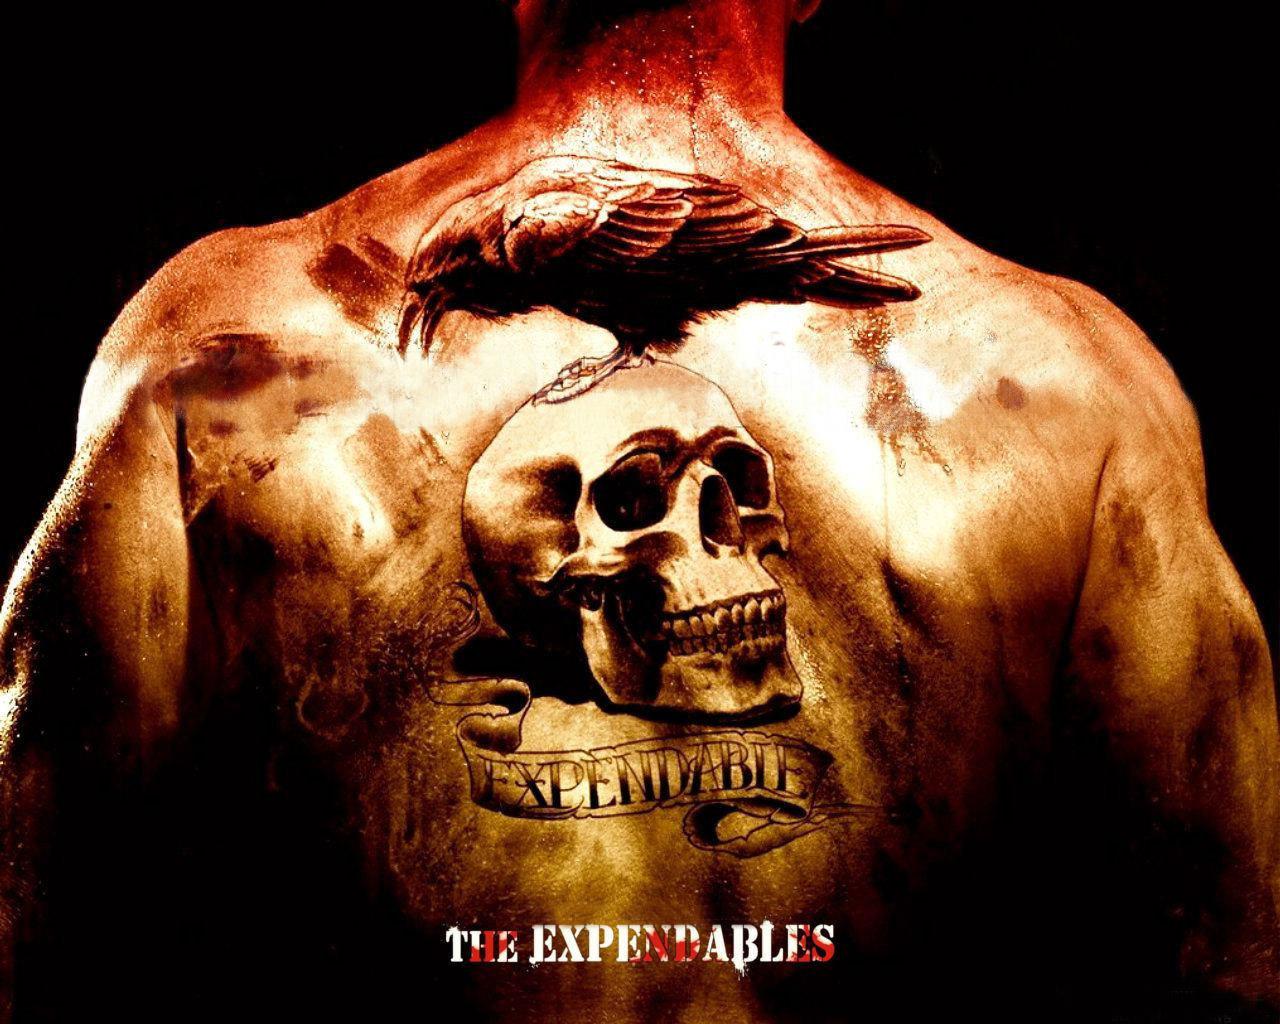 The Expendables cellphone Wallpaper